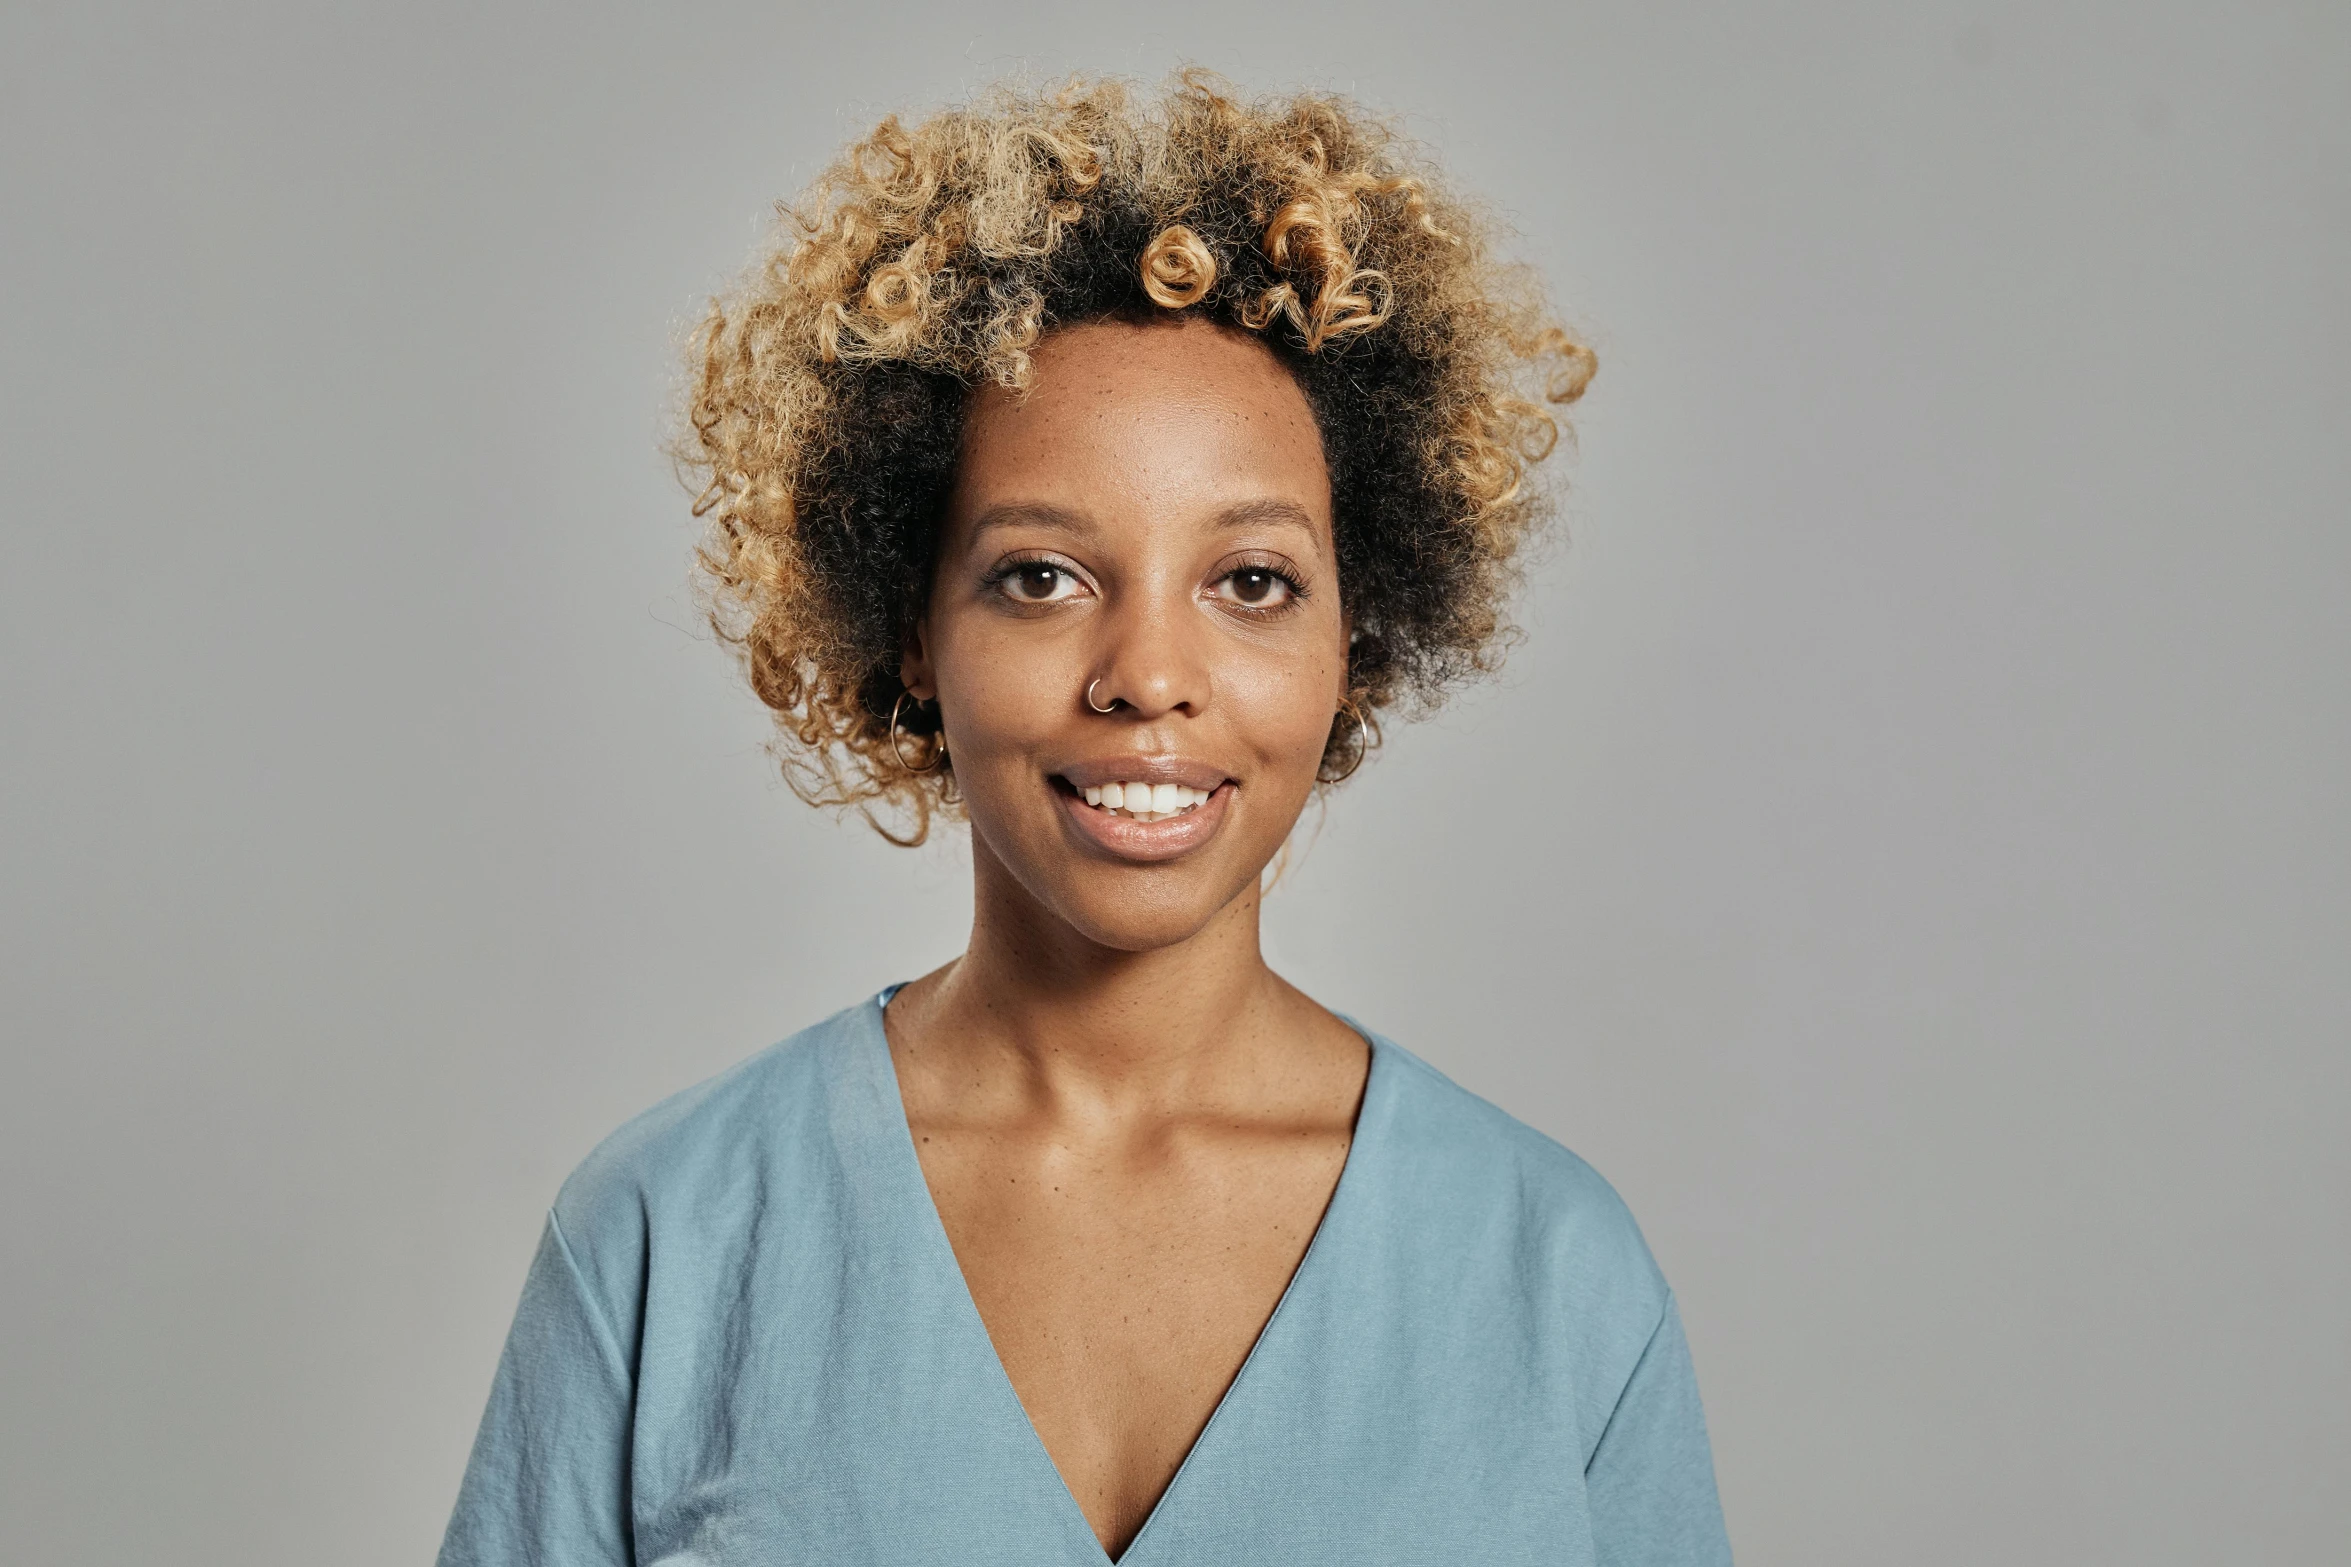 a woman with curly hair posing for a picture, les nabis, plain background, cerulean, light brown skin, architect